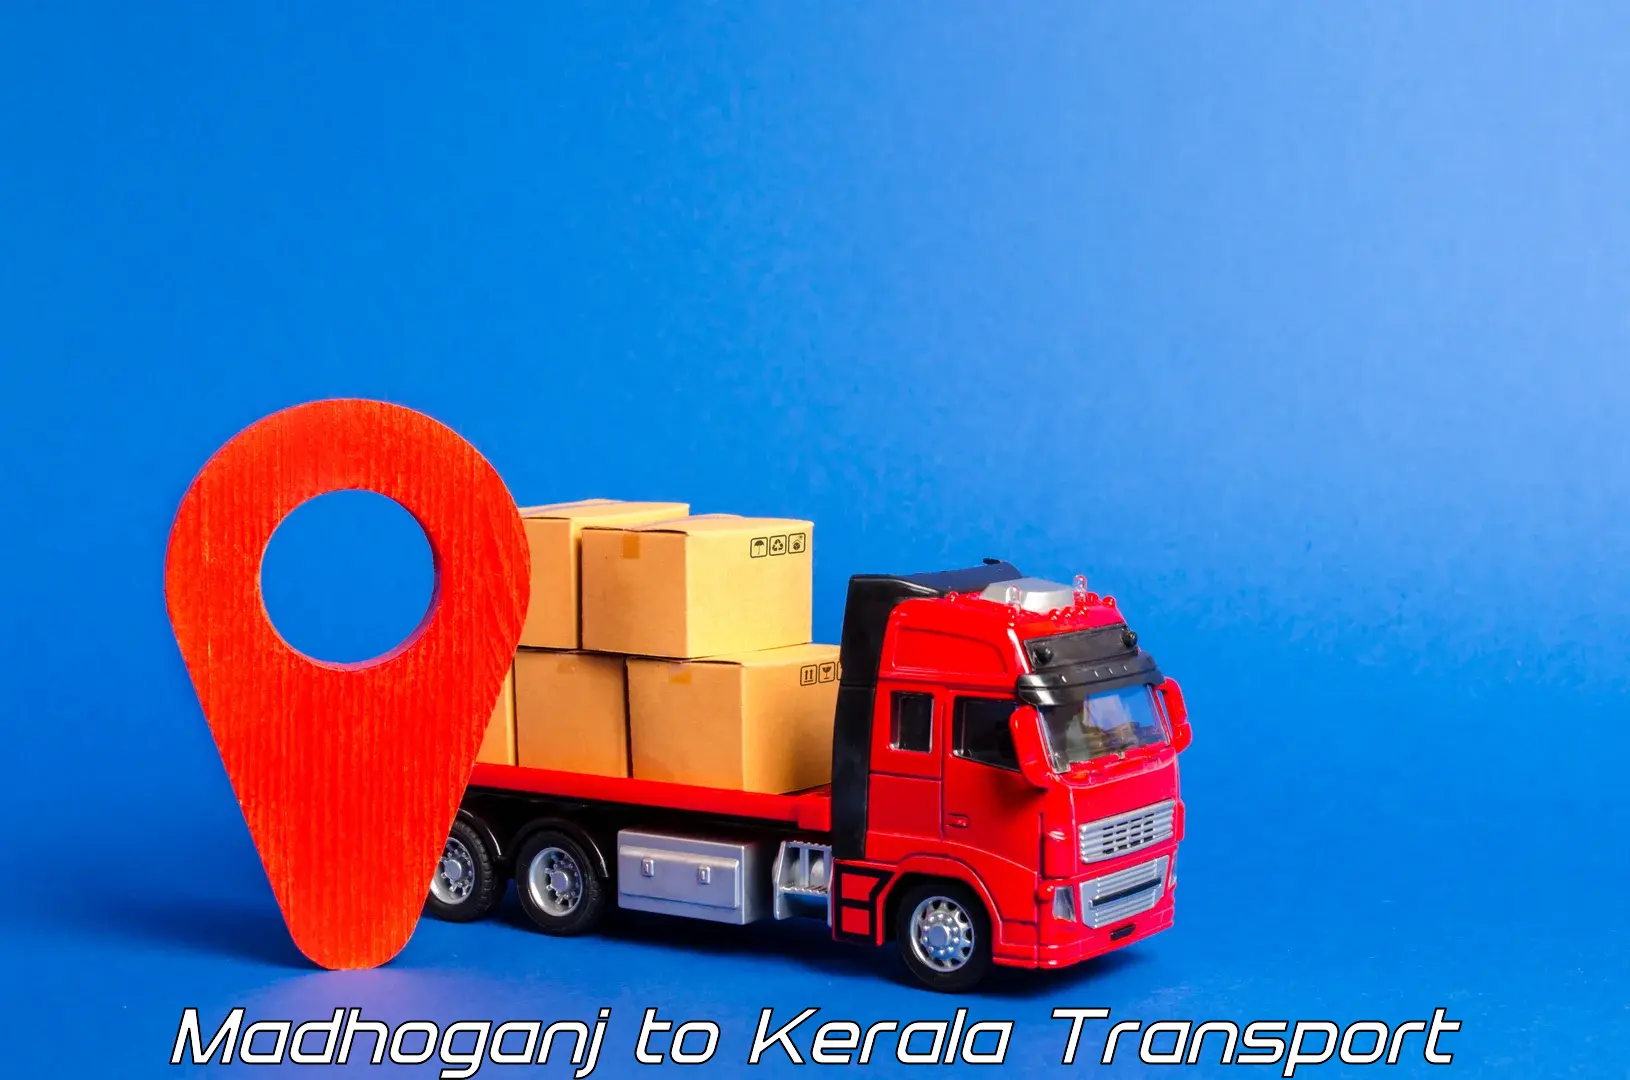 Container transportation services Madhoganj to Cochin University of Science and Technology